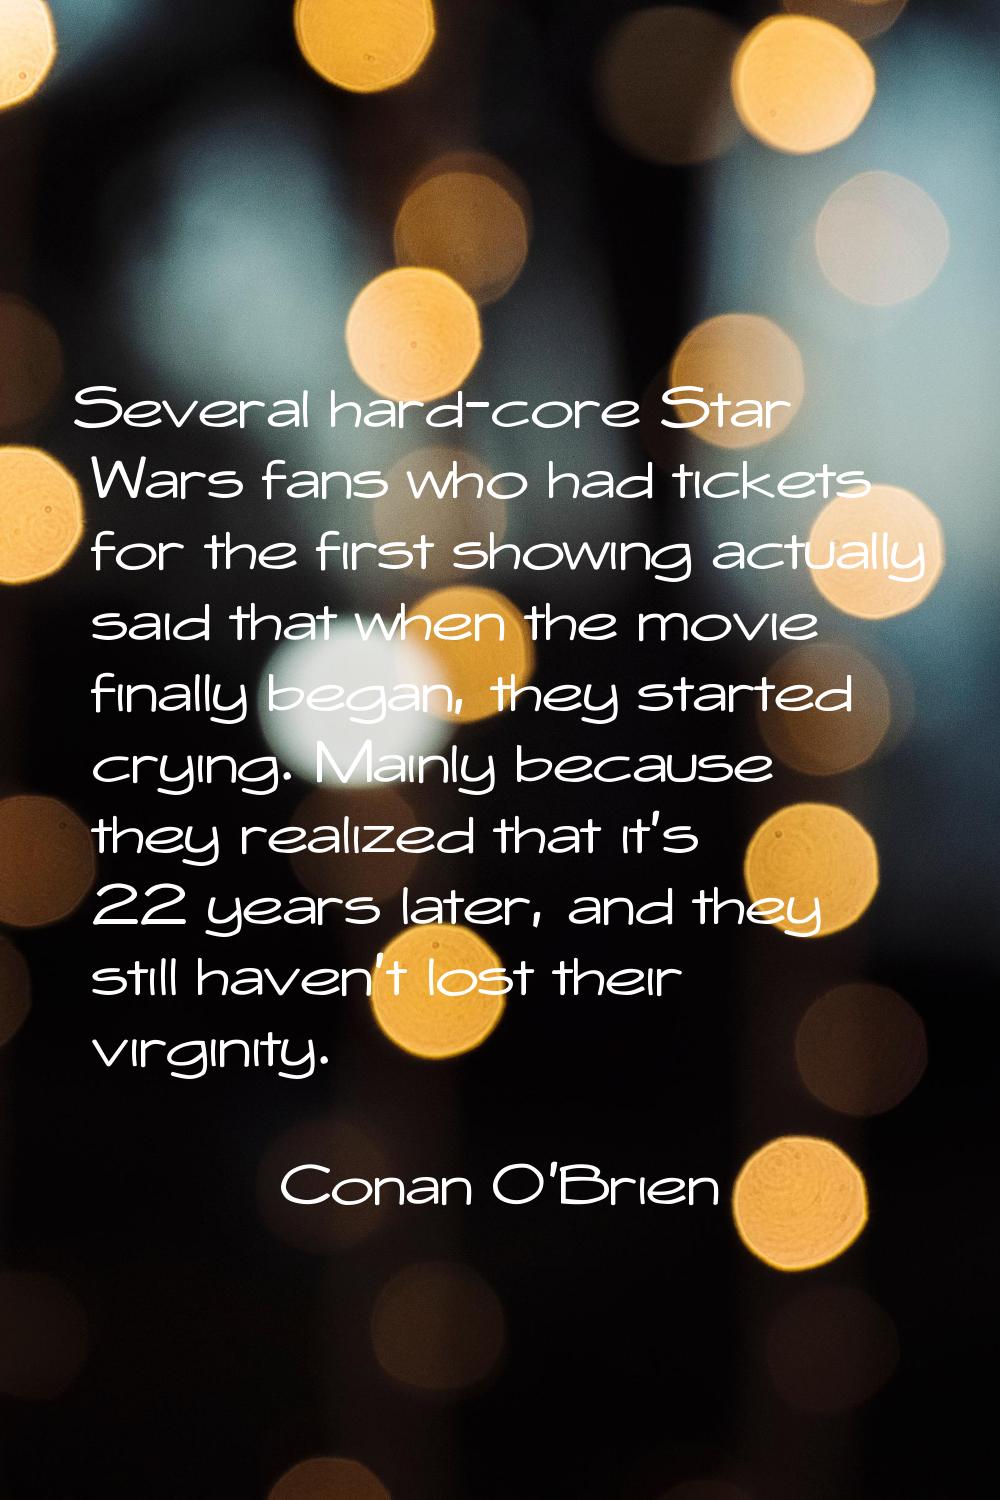 Several hard-core Star Wars fans who had tickets for the first showing actually said that when the 